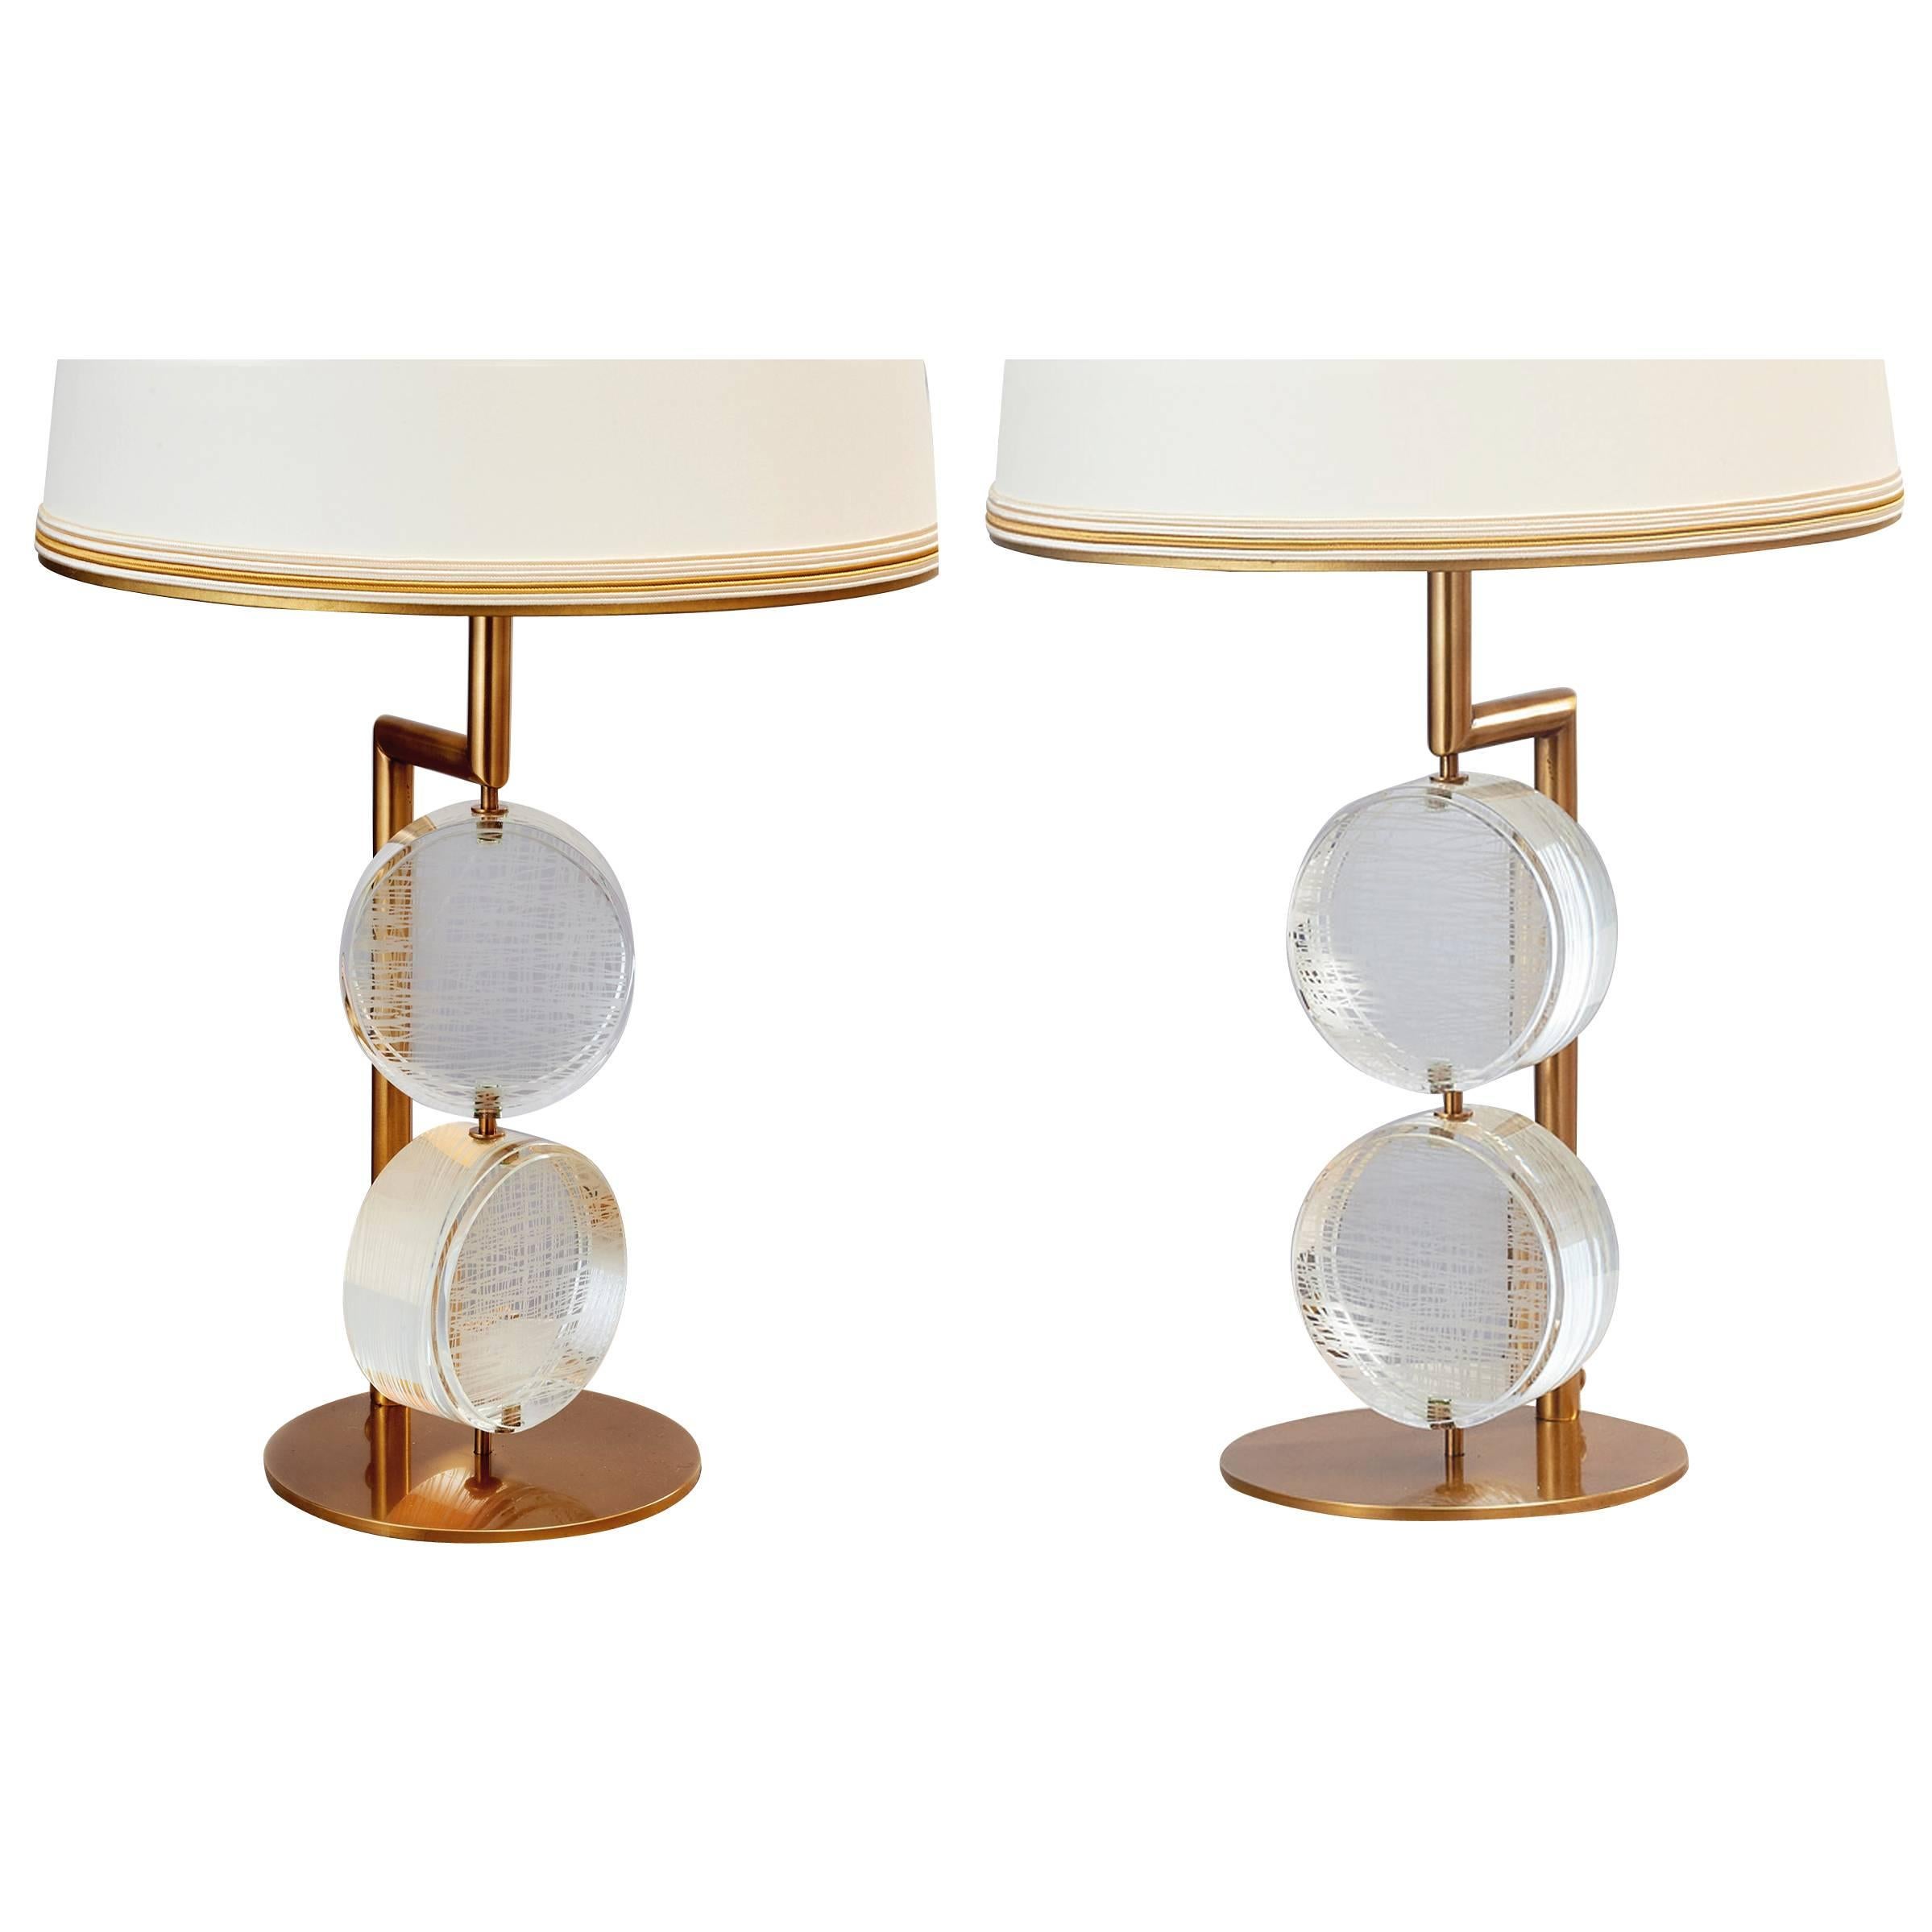 Roberto Rida (b.1943).
A kinetic pair of elongated table lamps with thick, movable, etched glass disks, bronze mounts.
Signed,  Italy, 2017.
Priced by the pair, two pair available
Dimensions: 30 H x 12 diameter.
Limited edition exclusive to L'Art de